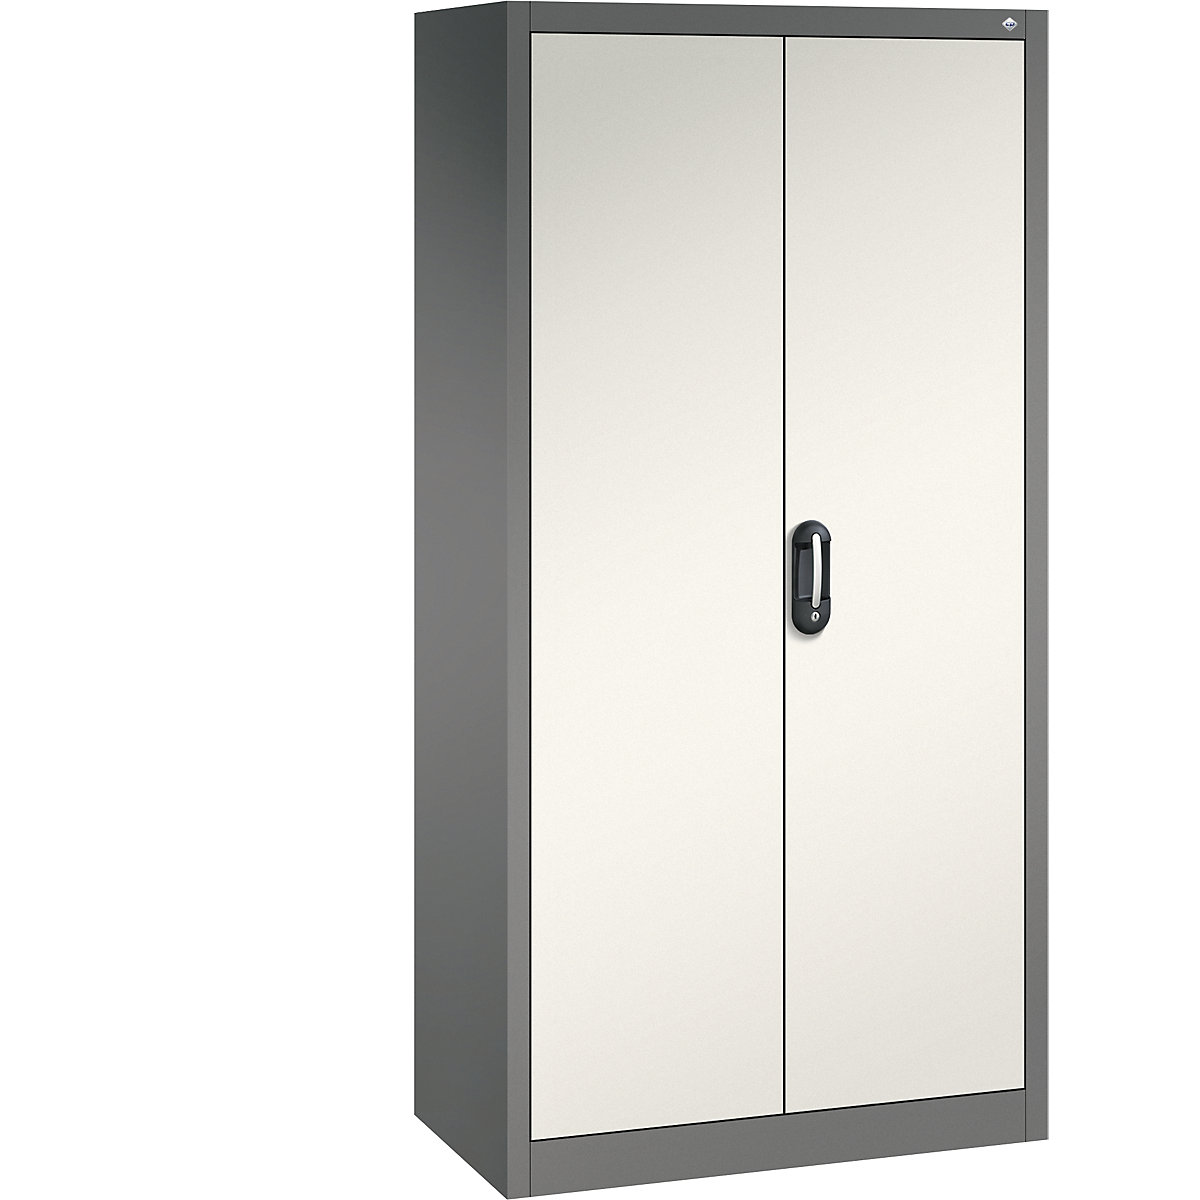 ACURADO universal cupboard – C+P, WxD 930 x 500 mm, volcanic grey / oyster white-30